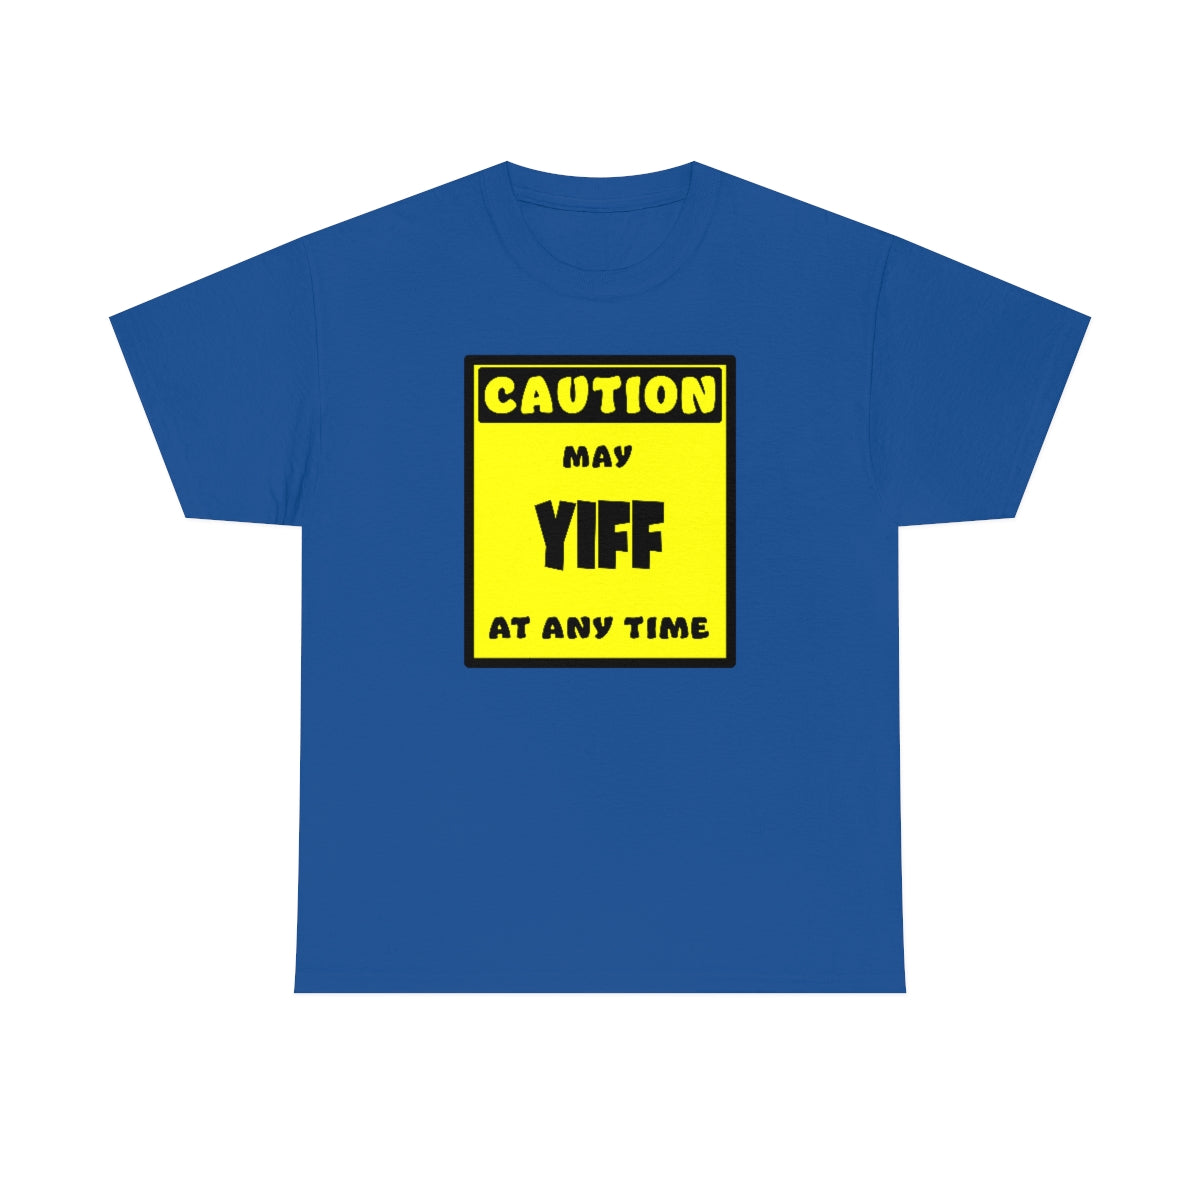 CAUTION! May YIFF at any time! - T-Shirt T-Shirt AFLT-Whootorca Royal Blue S 